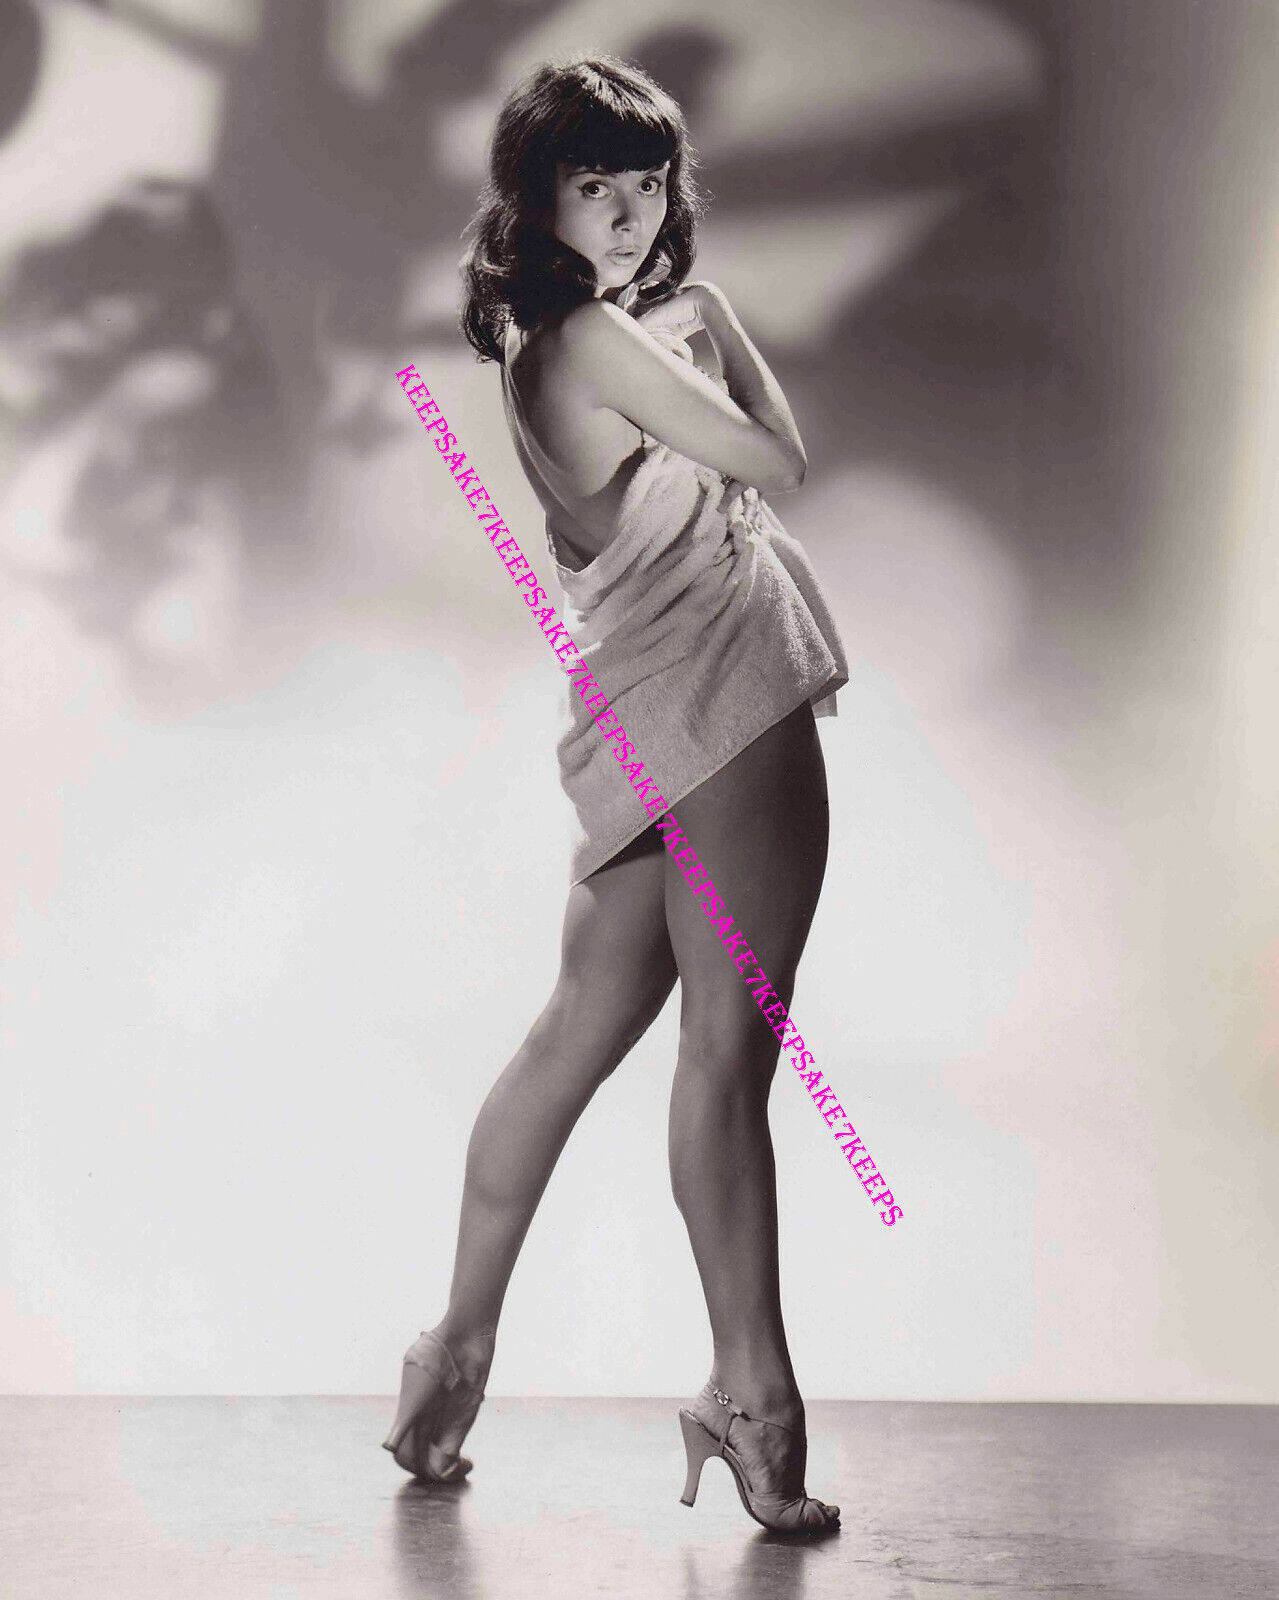 1940's ACTRESS/SINGER JULIE GIBSON IN A TOWEL AND HEELS LEGGY 8x10 PHOTO A-JGIB1